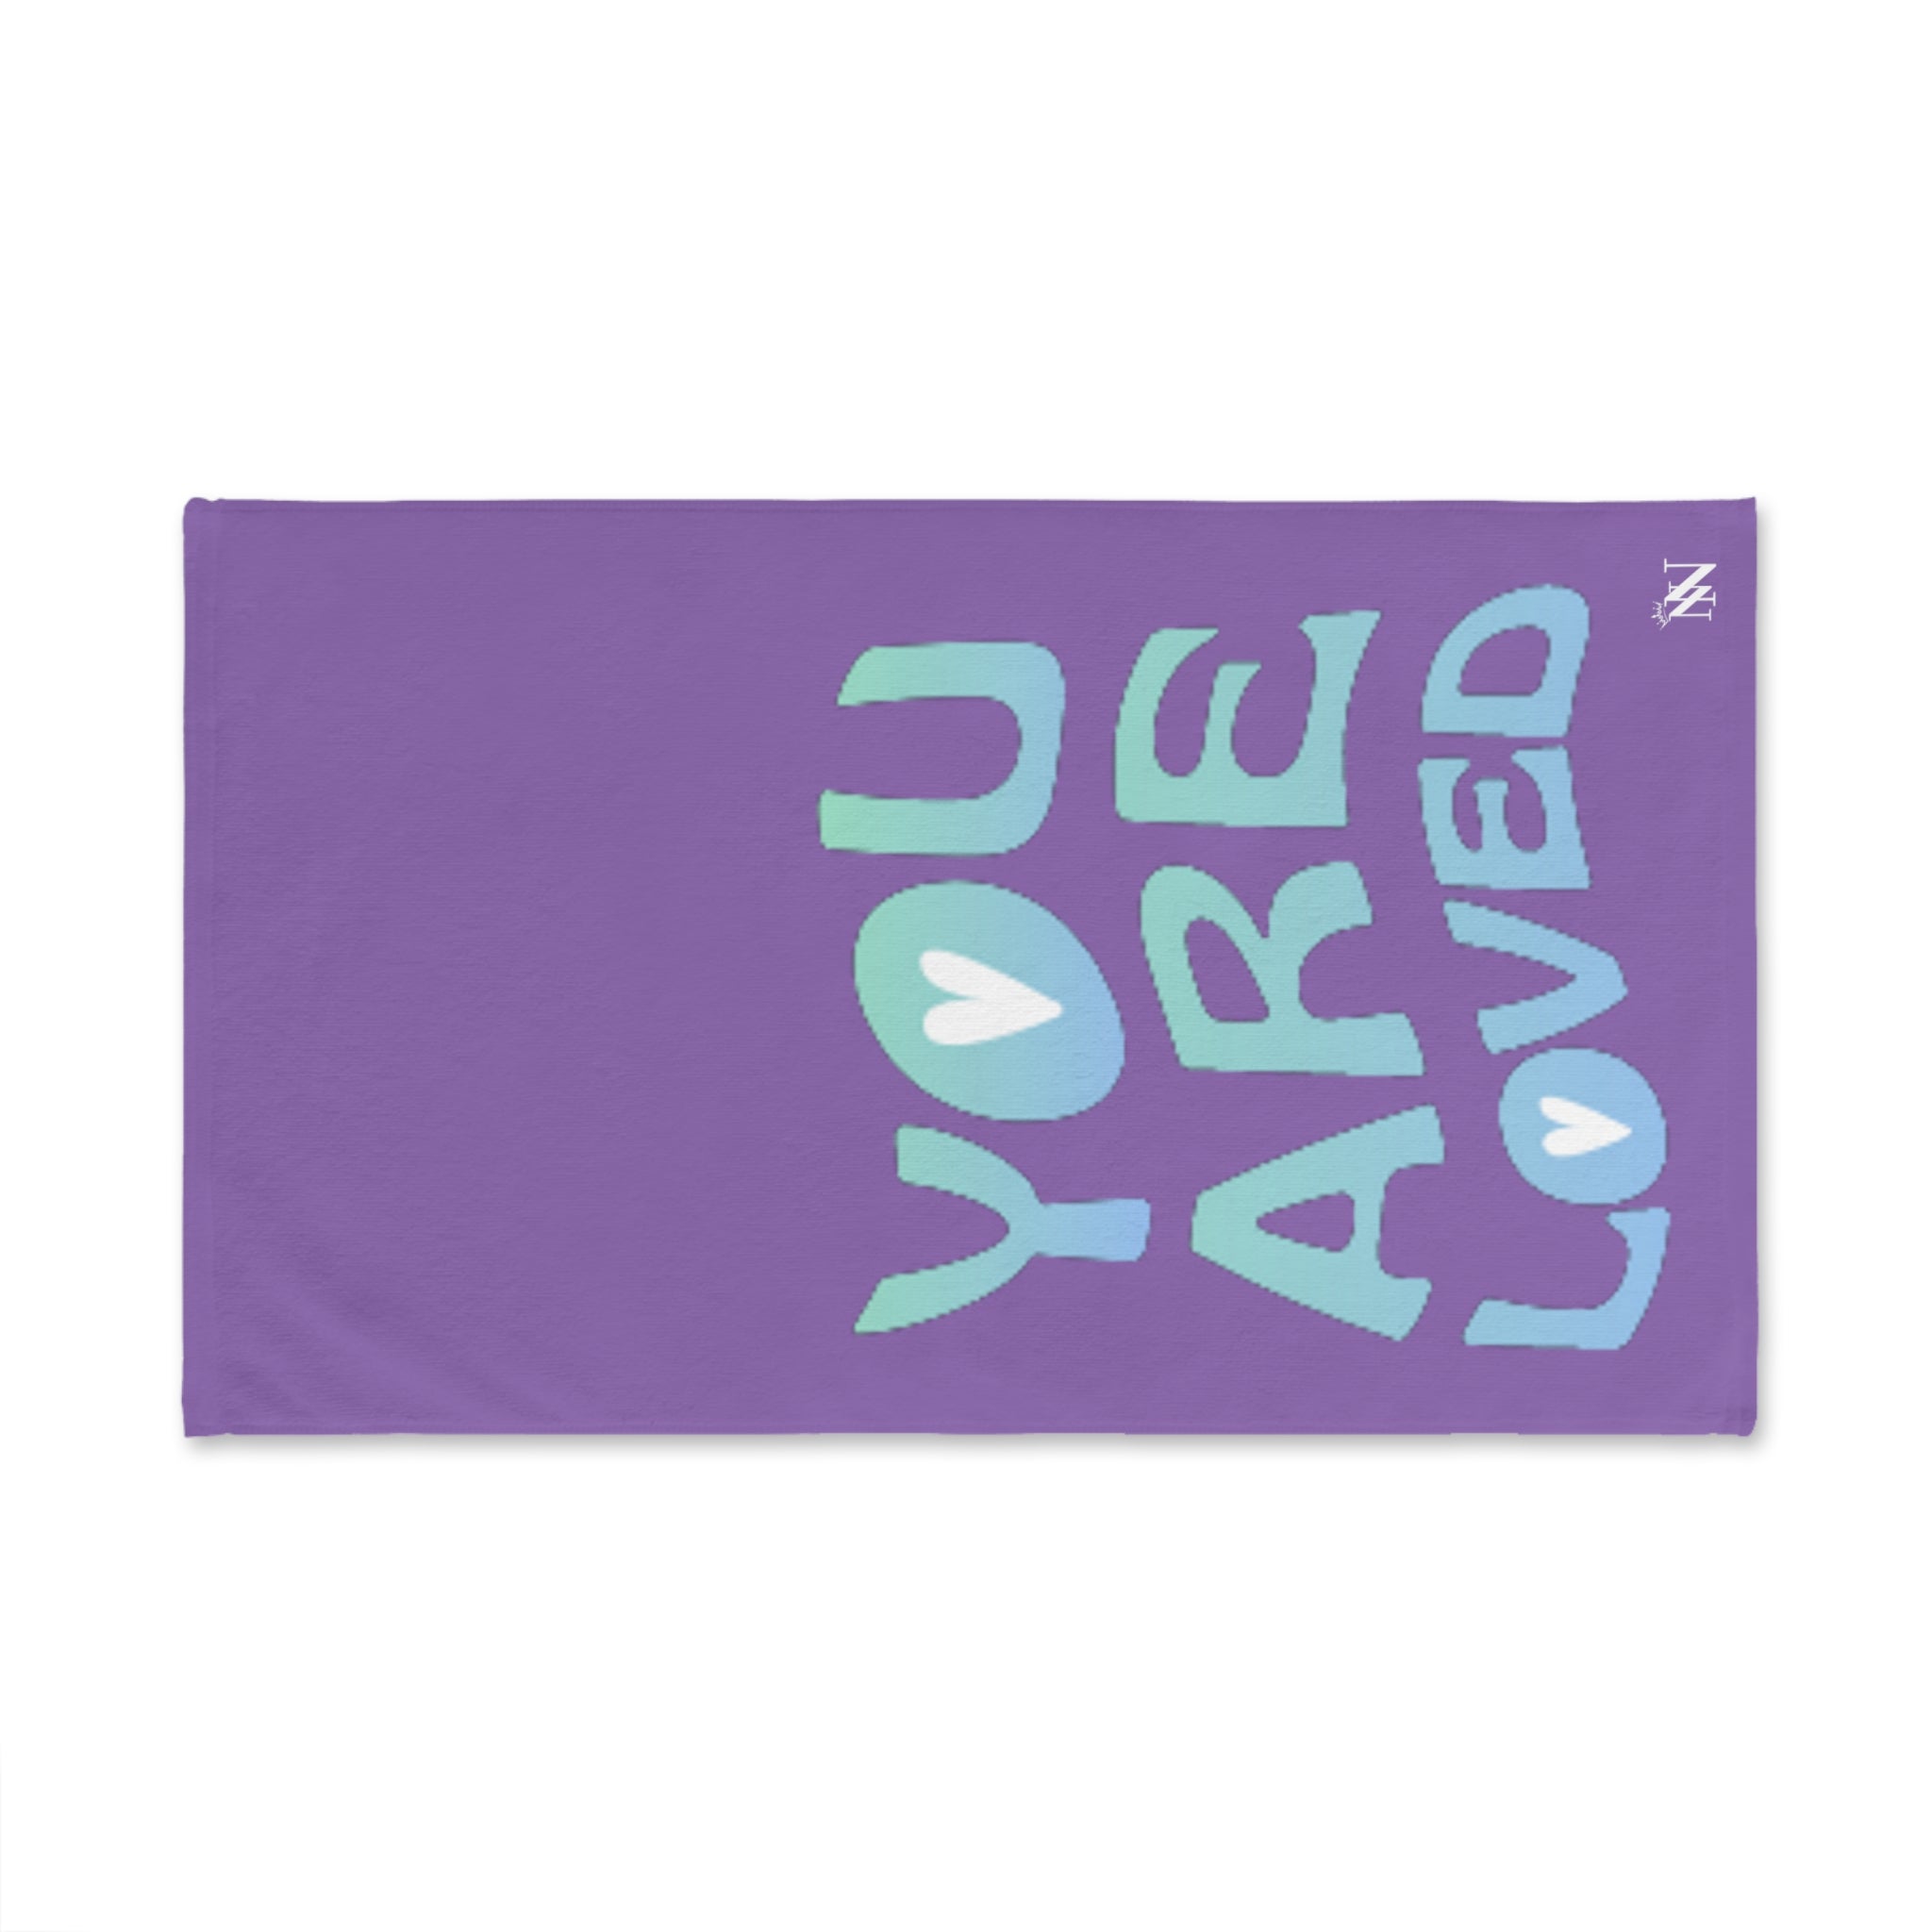 Loved You Are Lavendar | Funny Gifts for Men - Gifts for Him - Birthday Gifts for Men, Him, Husband, Boyfriend, New Couple Gifts, Fathers & Valentines Day Gifts, Hand Towels NECTAR NAPKINS